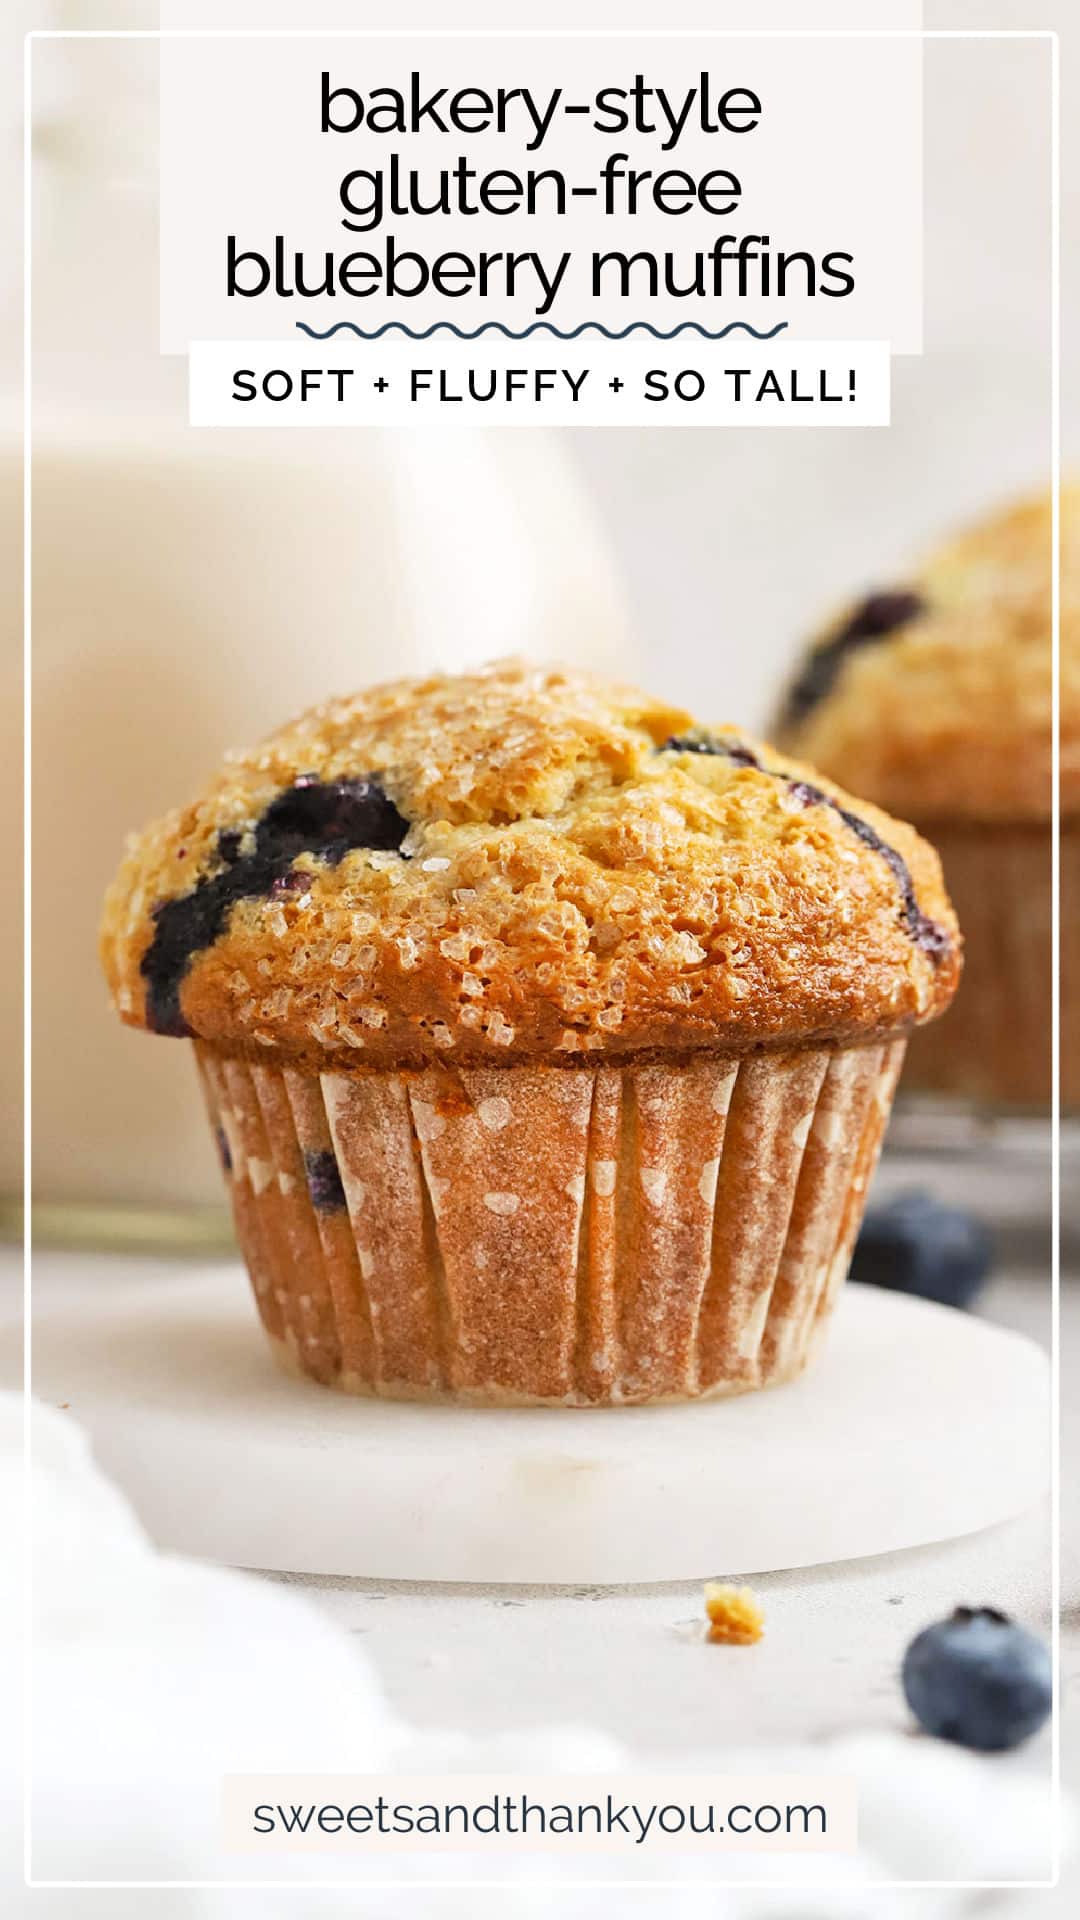 These bakery-style gluten-free blueberry muffins are light, fluffy, and packed with fresh blueberry flavor. They're perfect for a special breakfast or gluten-free brunch! / fluffy gluten-free blueberry muffins / easy gluten-free blueberry muffins / gluten-free blueberry muffin recipe / gluten-free muffin recipe / gluten-free sour cream blueberry muffins / gluten-free brunch recipe / gluten-free muffins